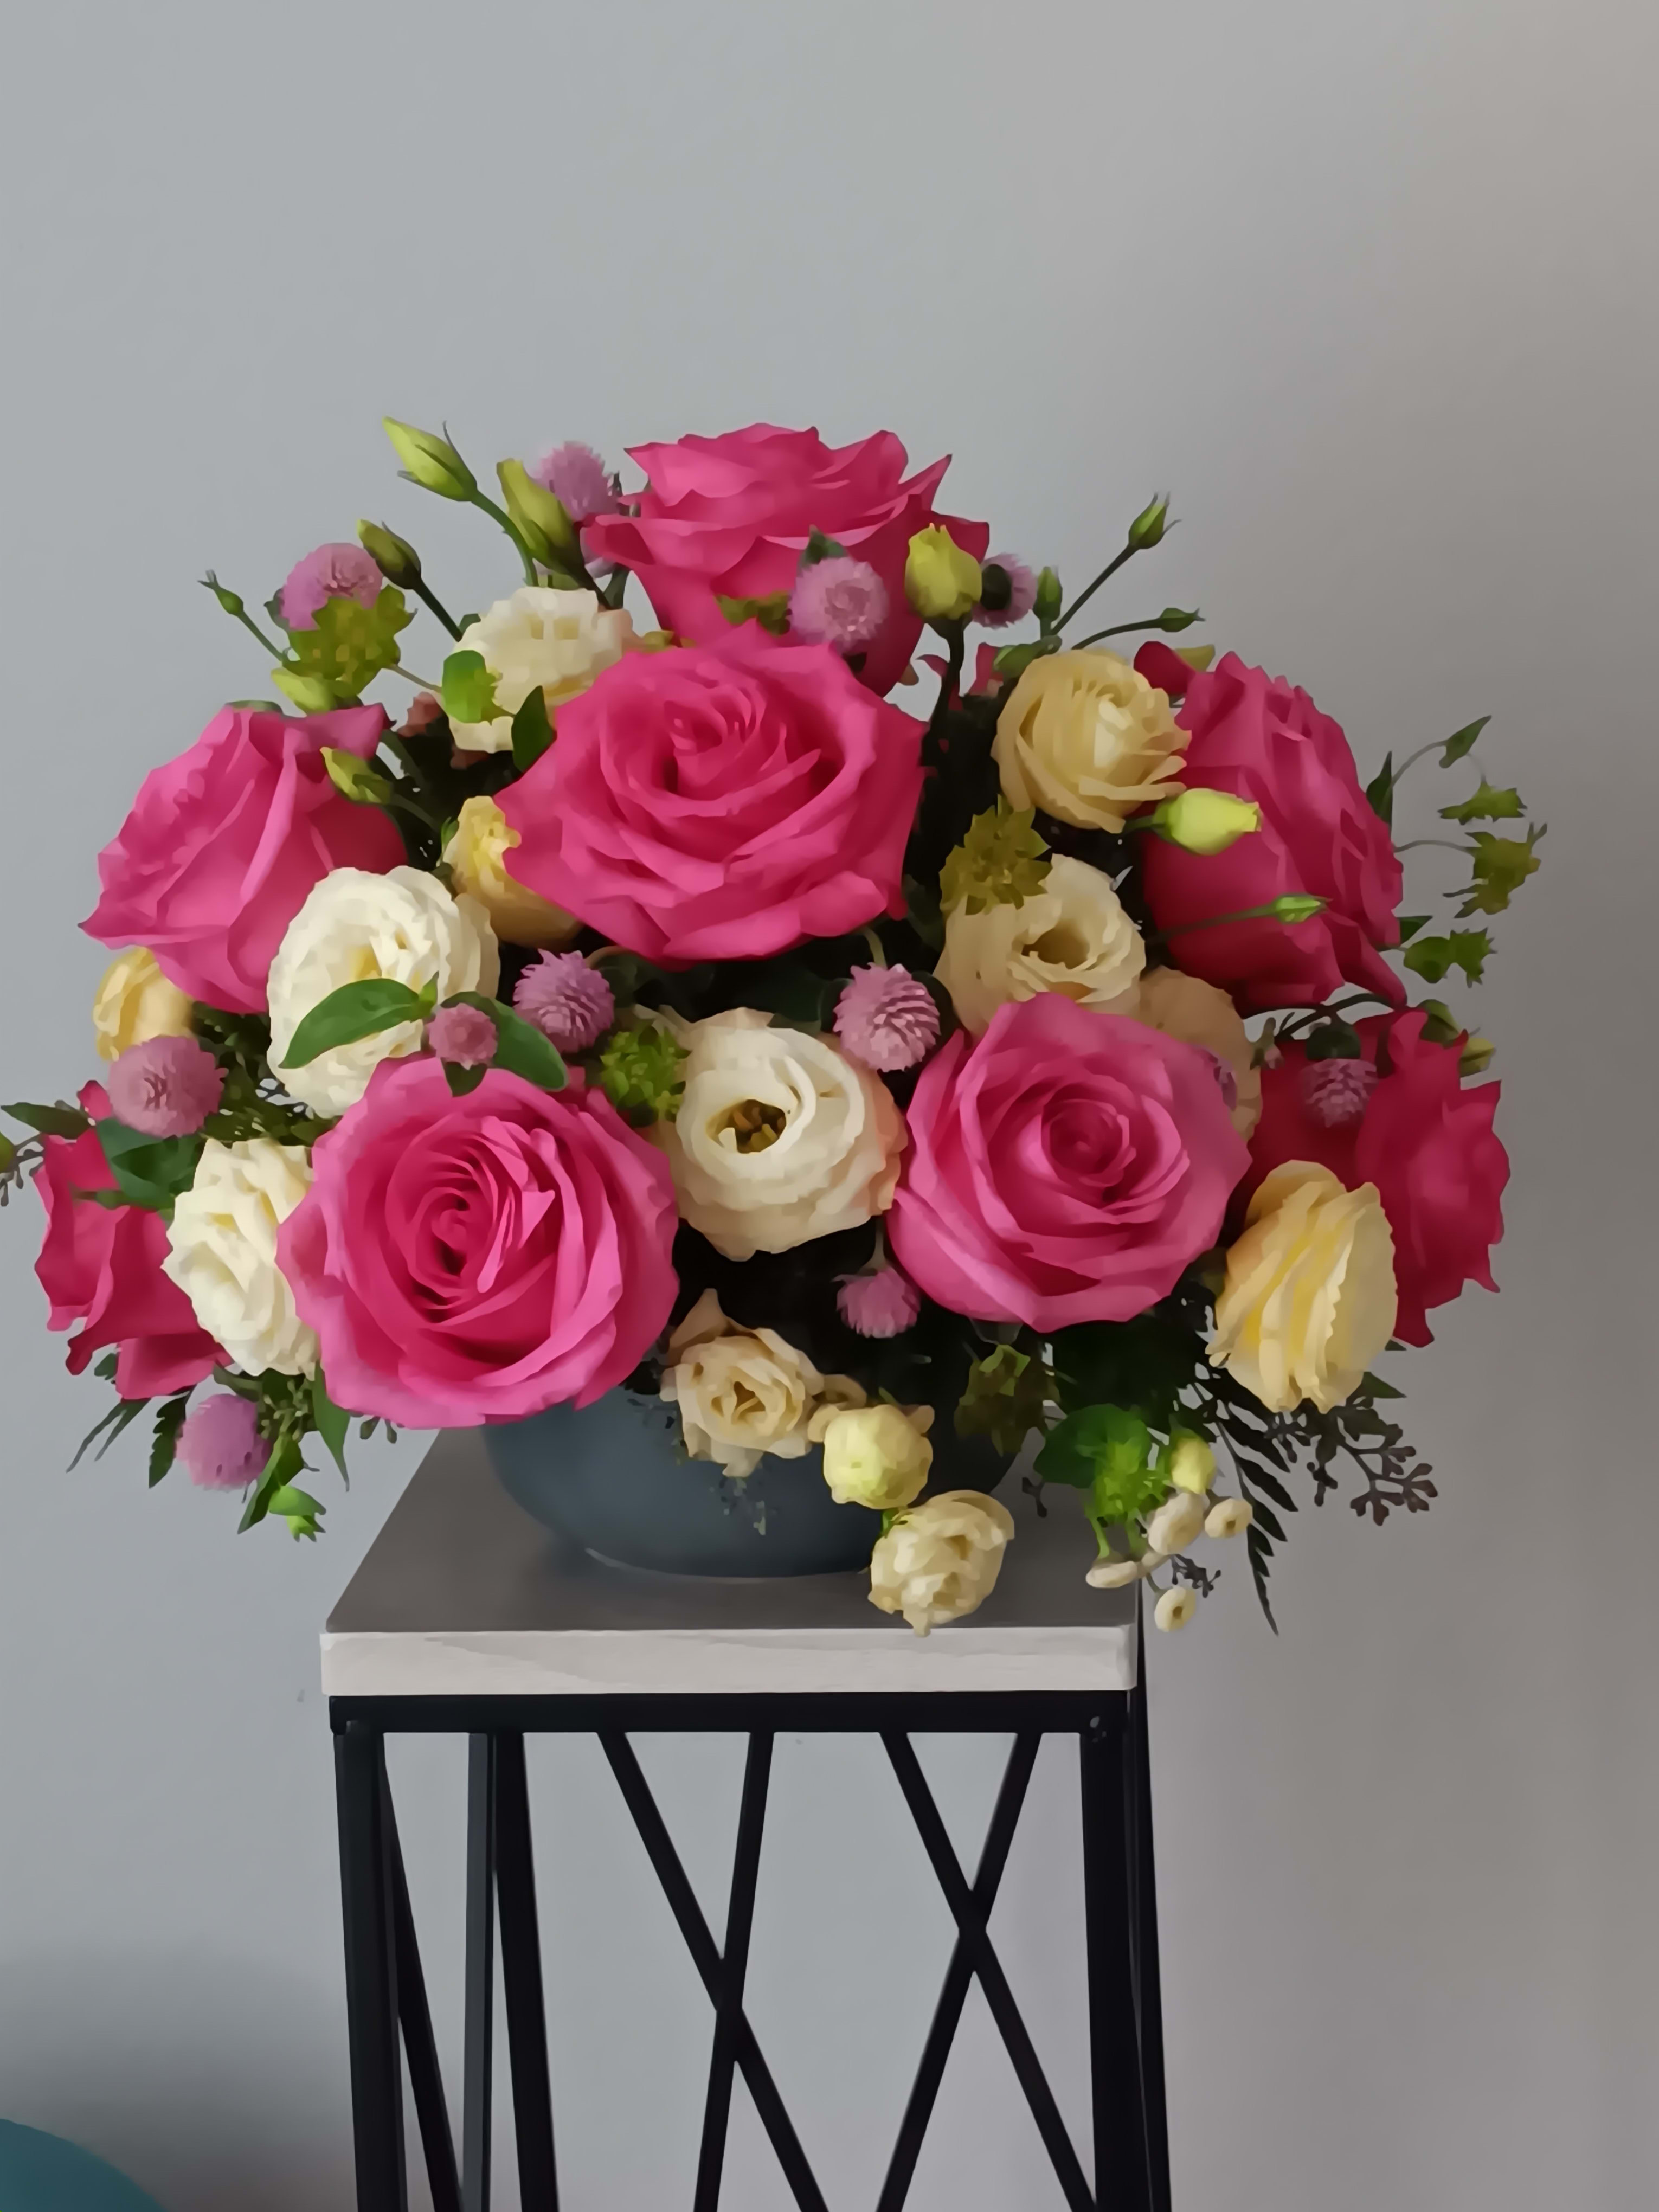 You're Precious Bouquet - Blushing shades of pink blooms are nestled in lush greens to charm anyone's day. This bouquet is abundant with a classic assortment of pretty florals – roses, lisianthus and chrisanthemums to name a few.